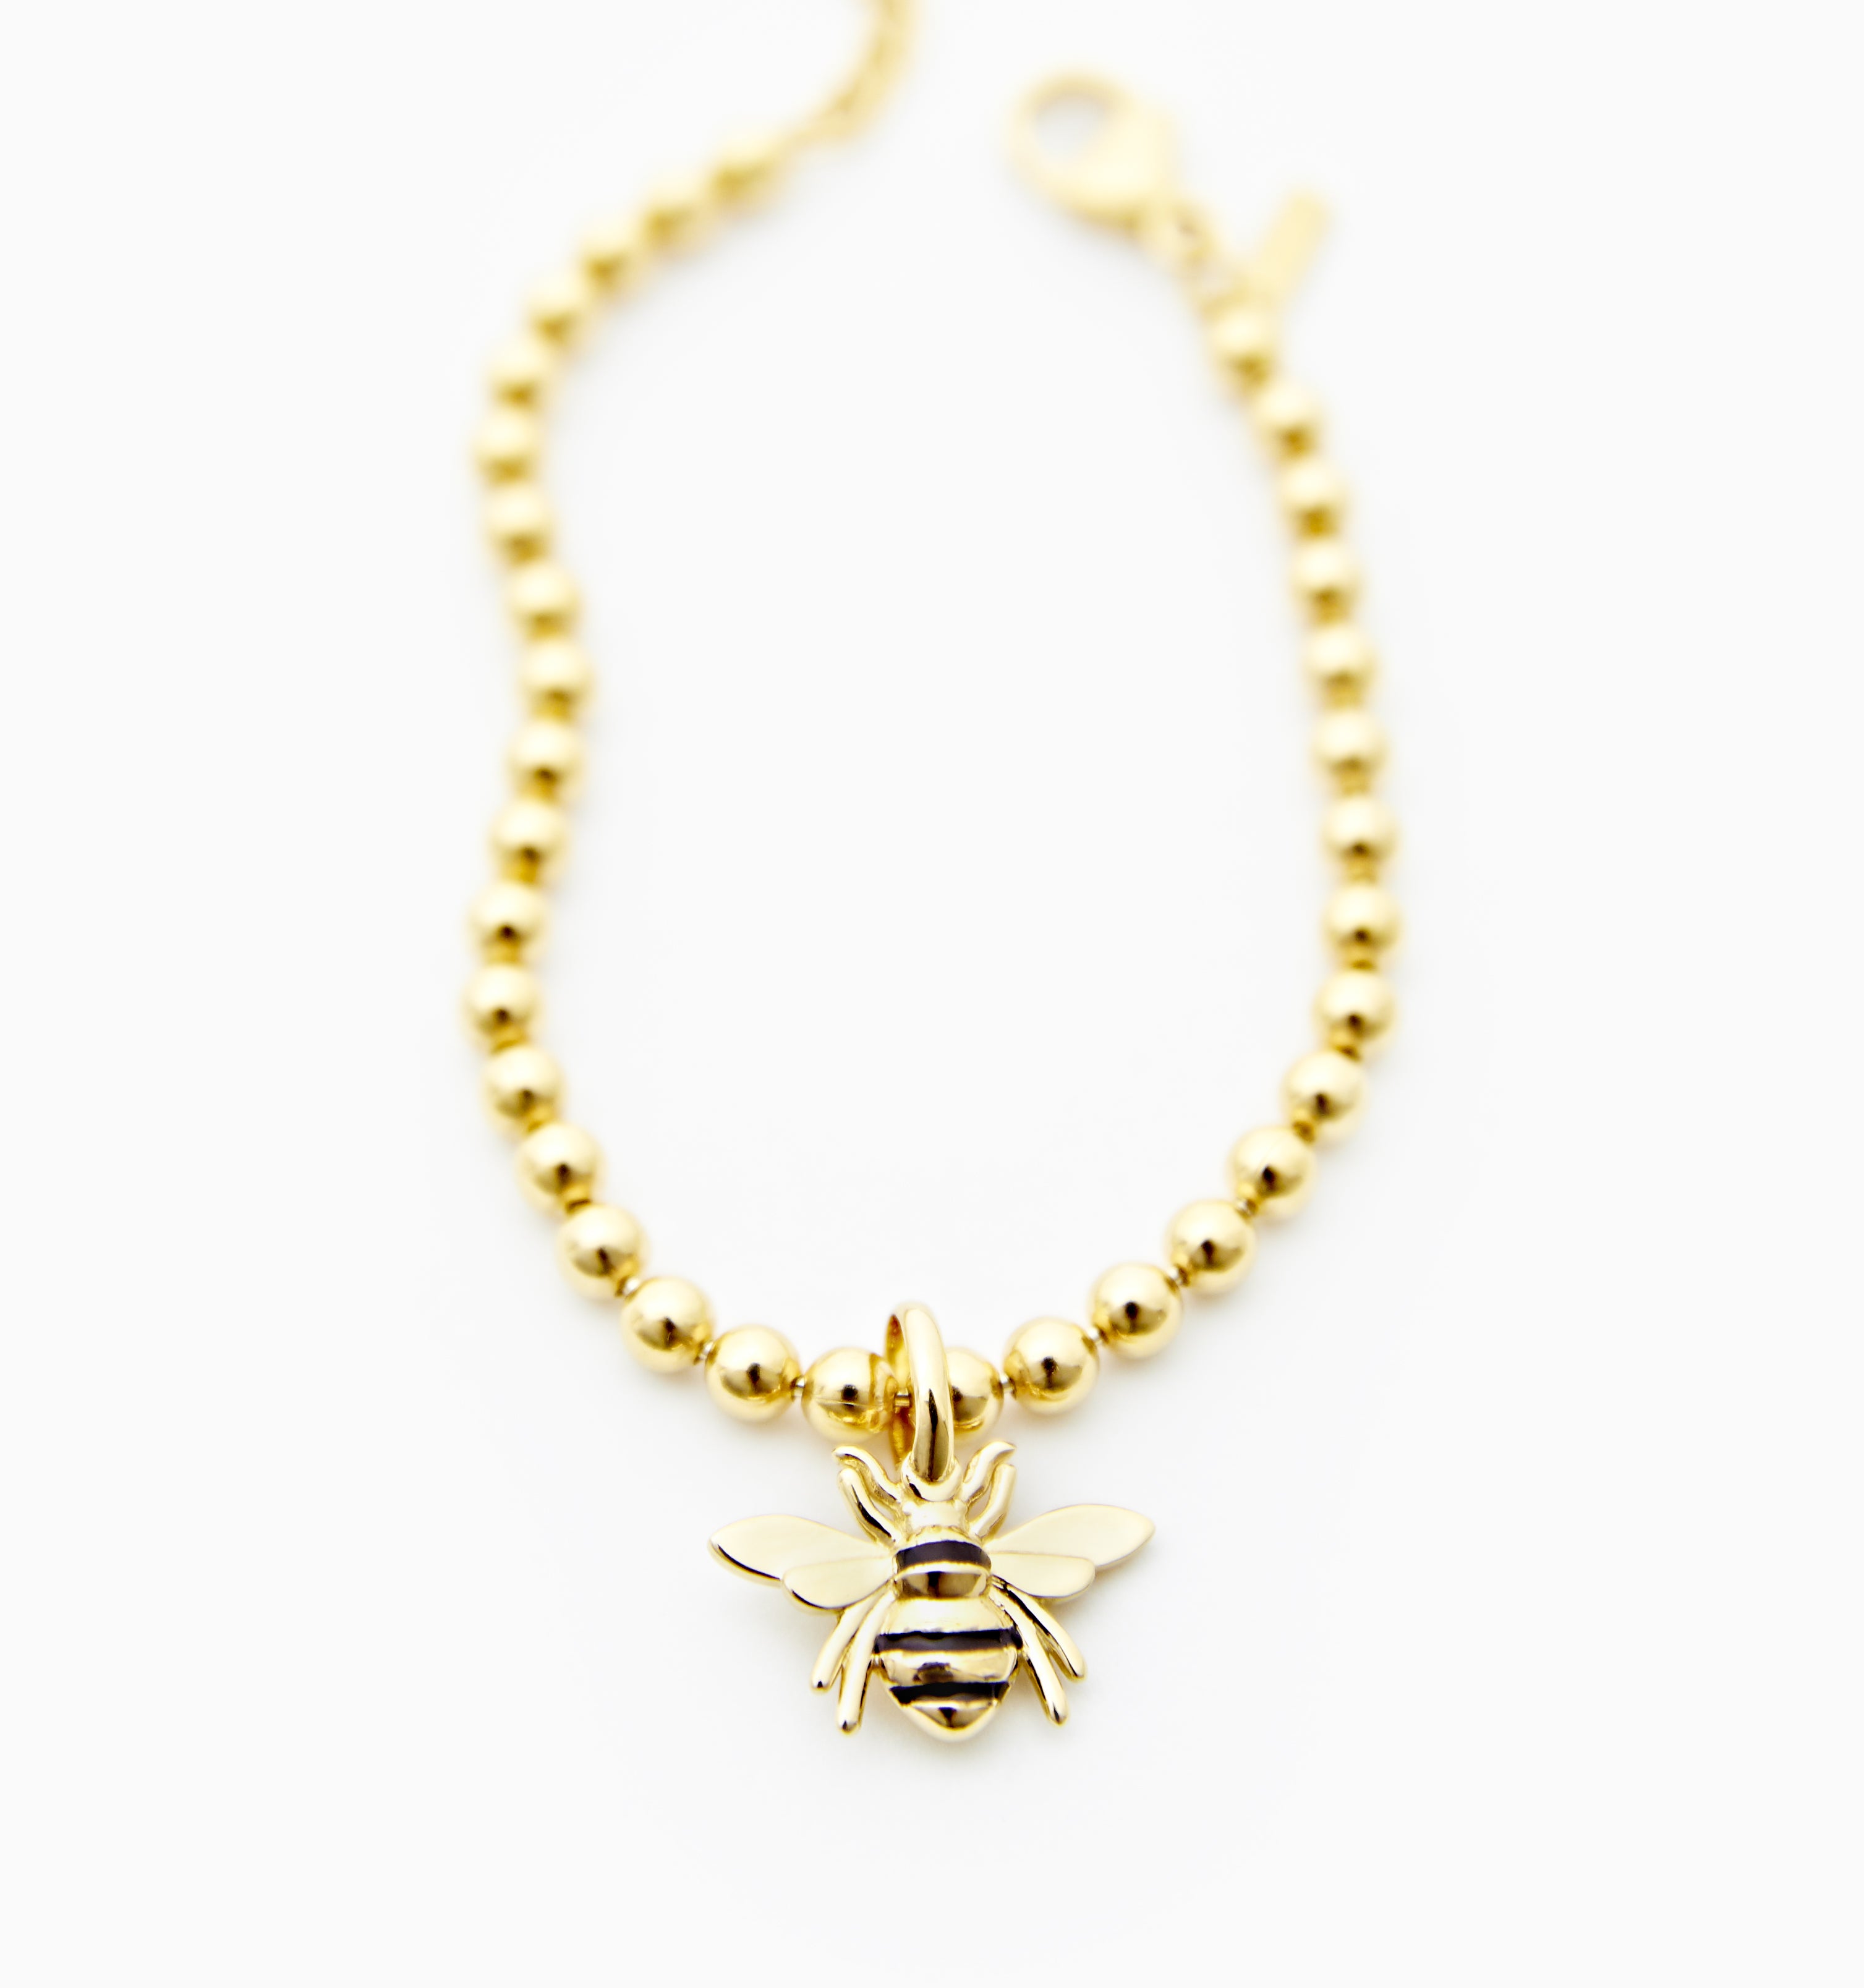 Bumble Bee Charm ~ Necklace or Bracelet